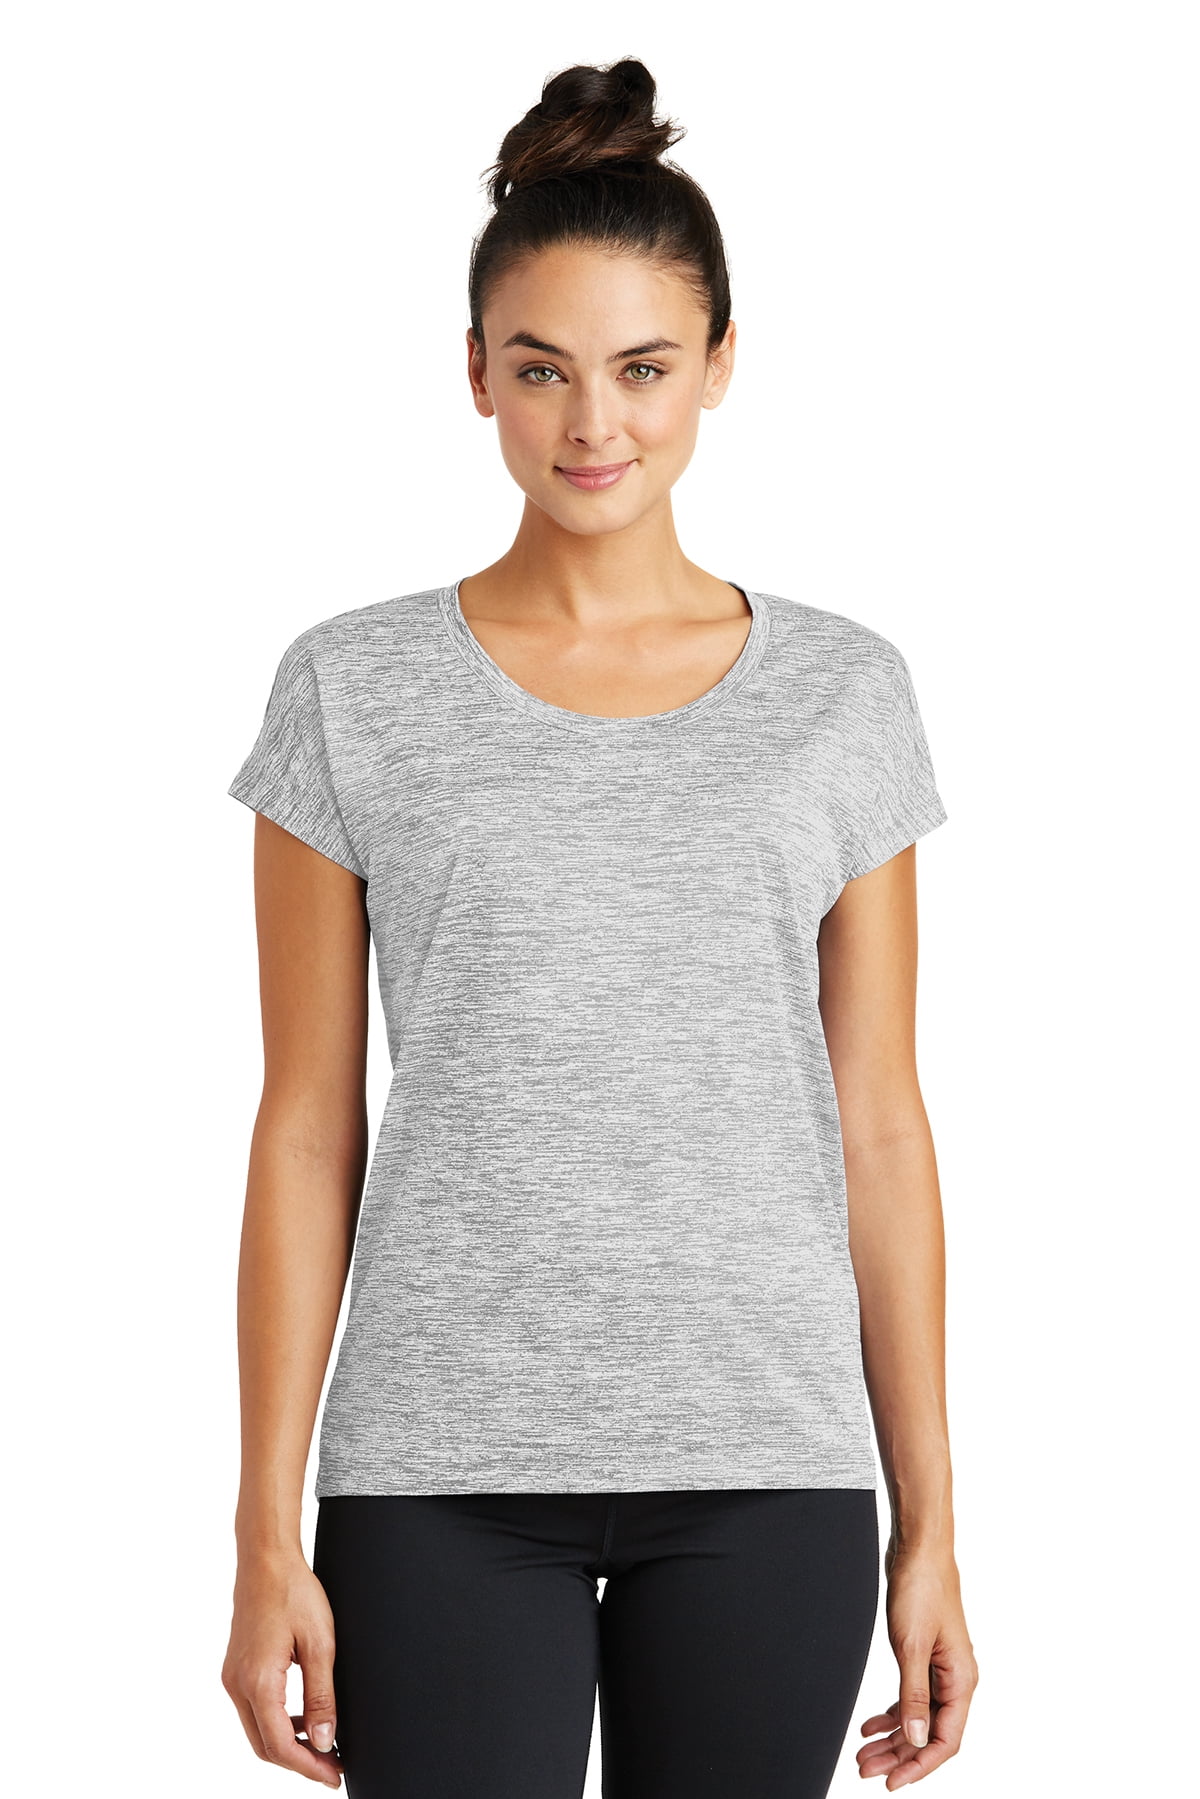 sporty tees